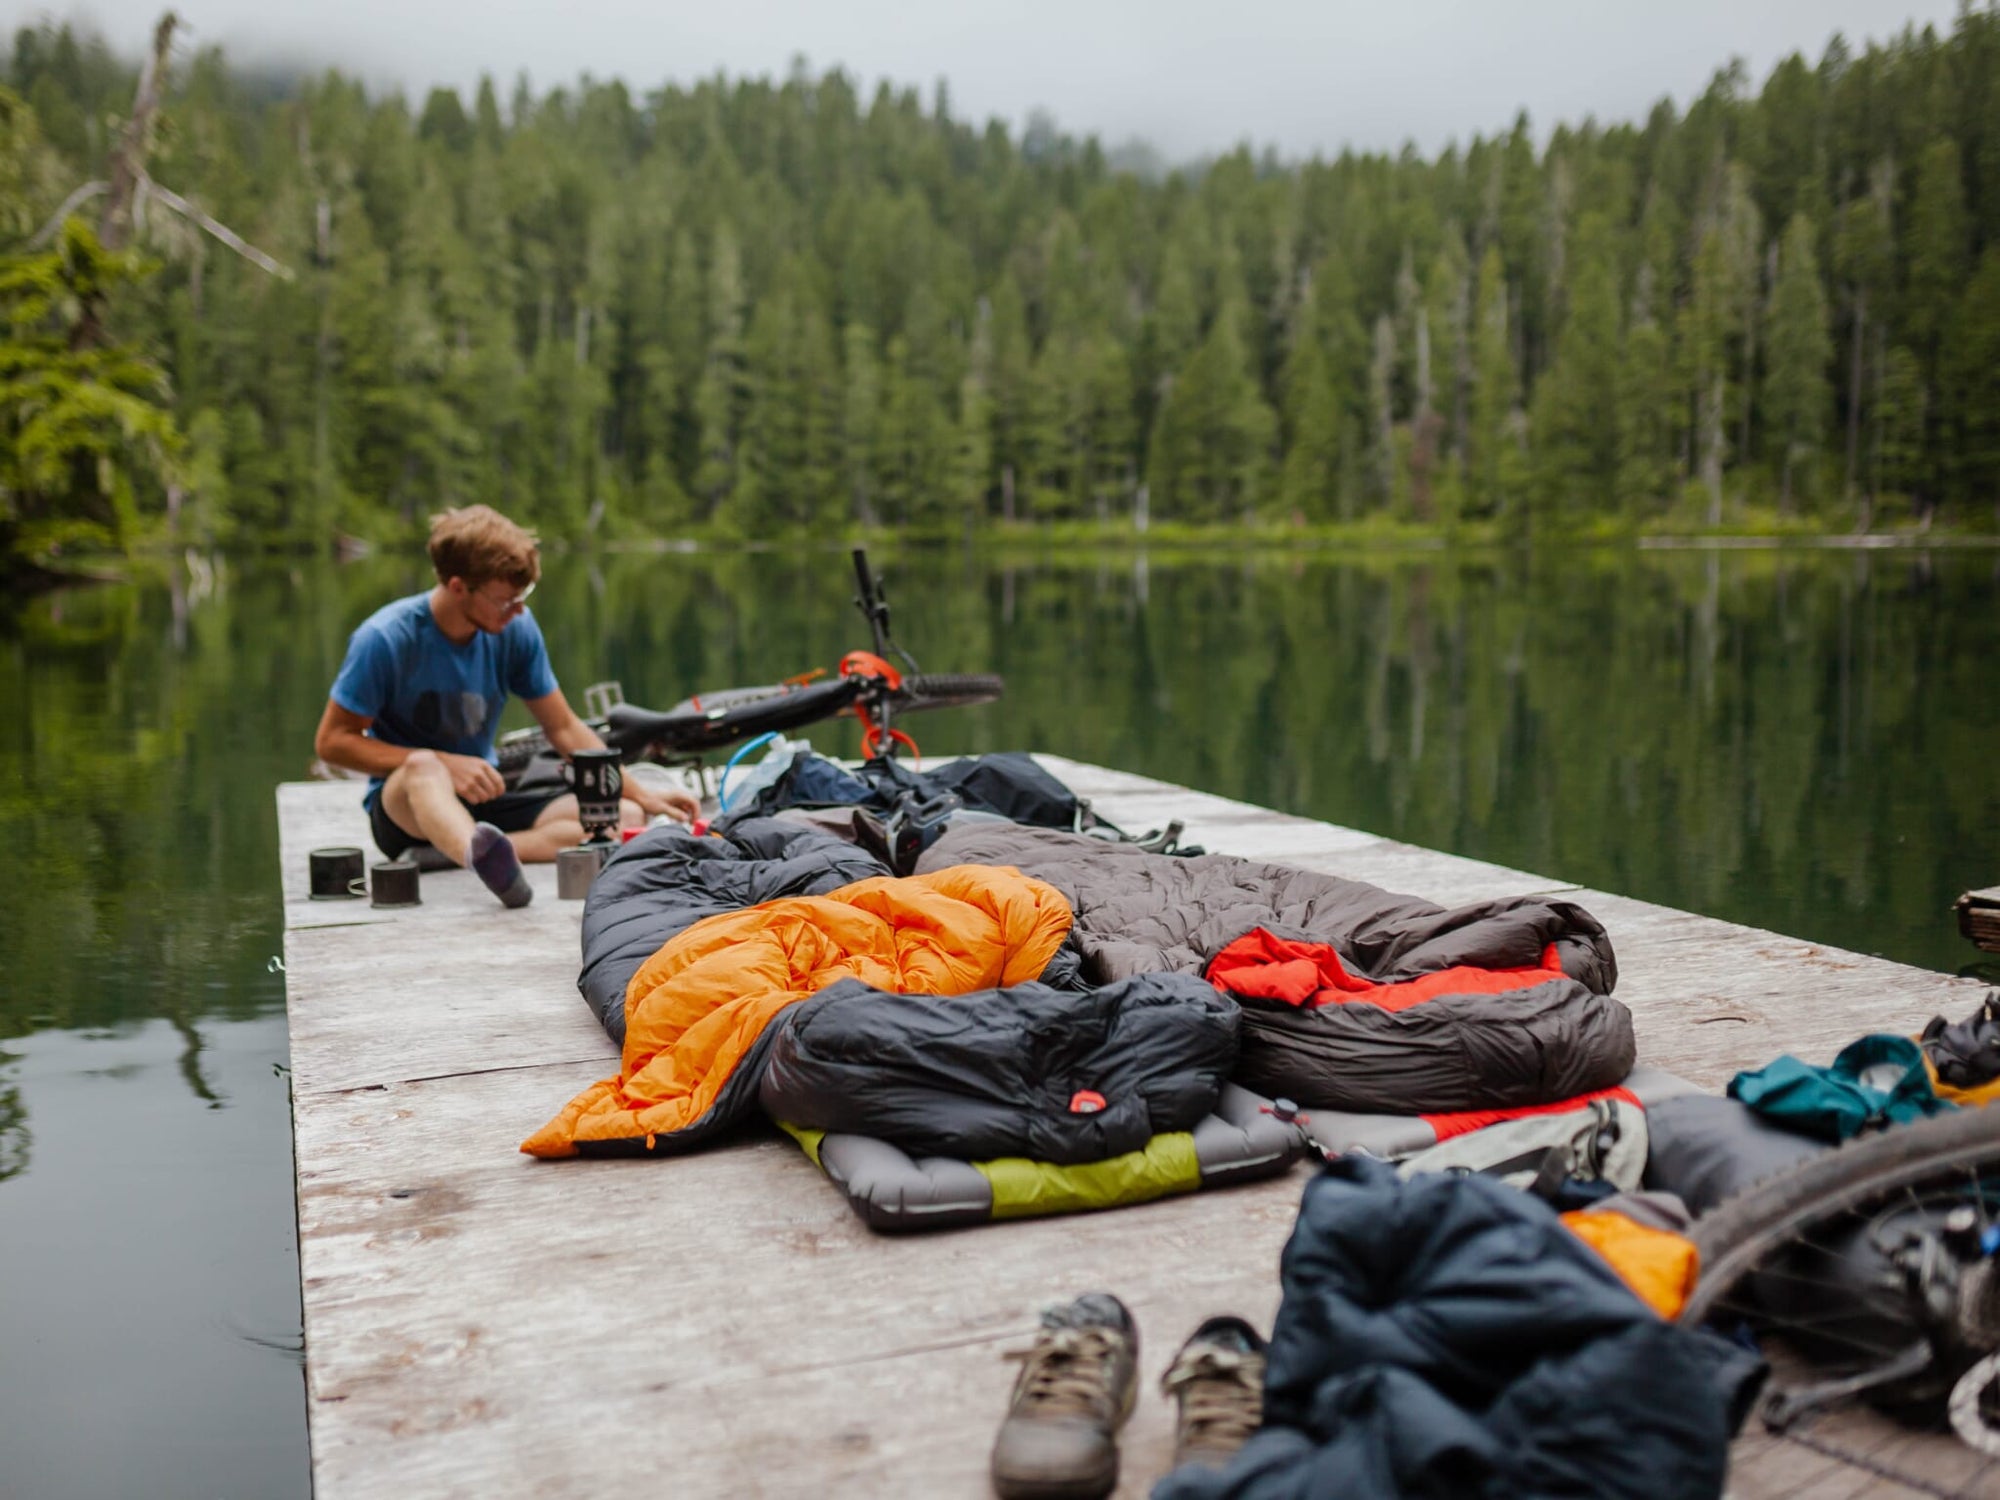 One Quilt, Every Adventure. How To Use Sheets and Mattresses To Optimize Your Setup